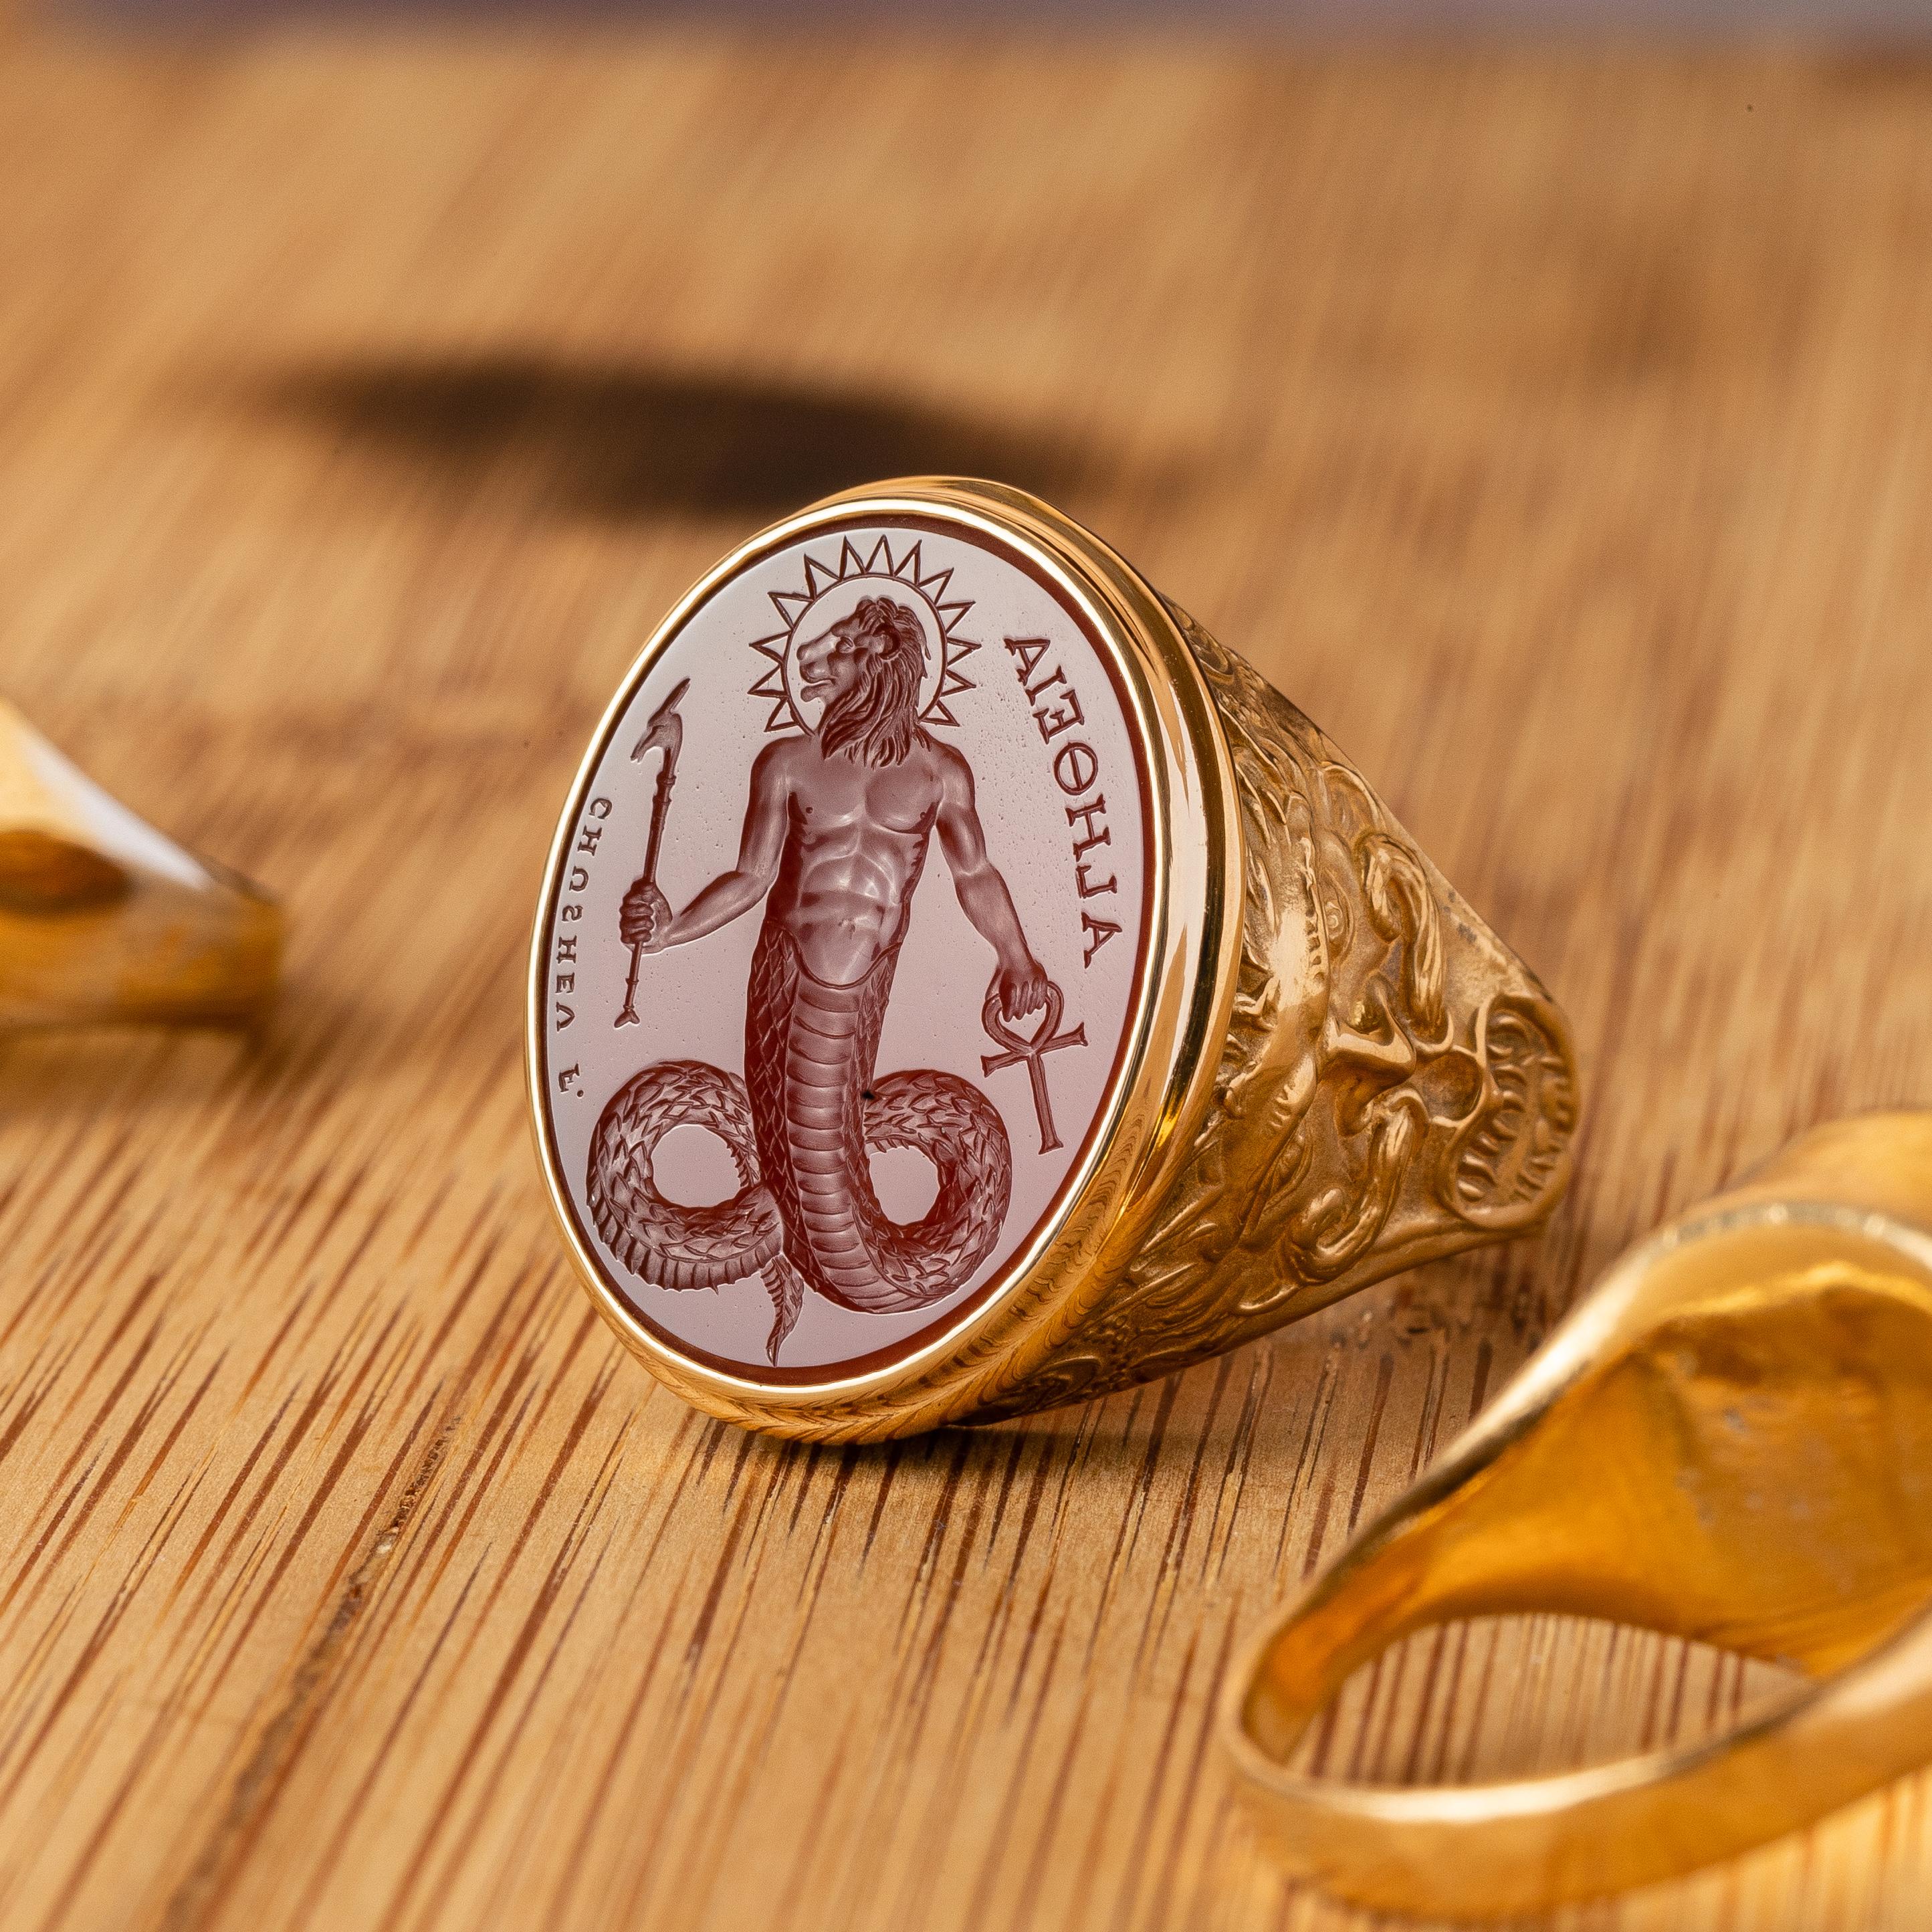 This exquisite intaglio is masterfully engraved onto rich carnelian gemstone and features the Gnostic deity, Chnoubis. The stone is set in an 18K signet ring.

Production time for this piece is up to 10 weeks.

Can be made in any size ranging from